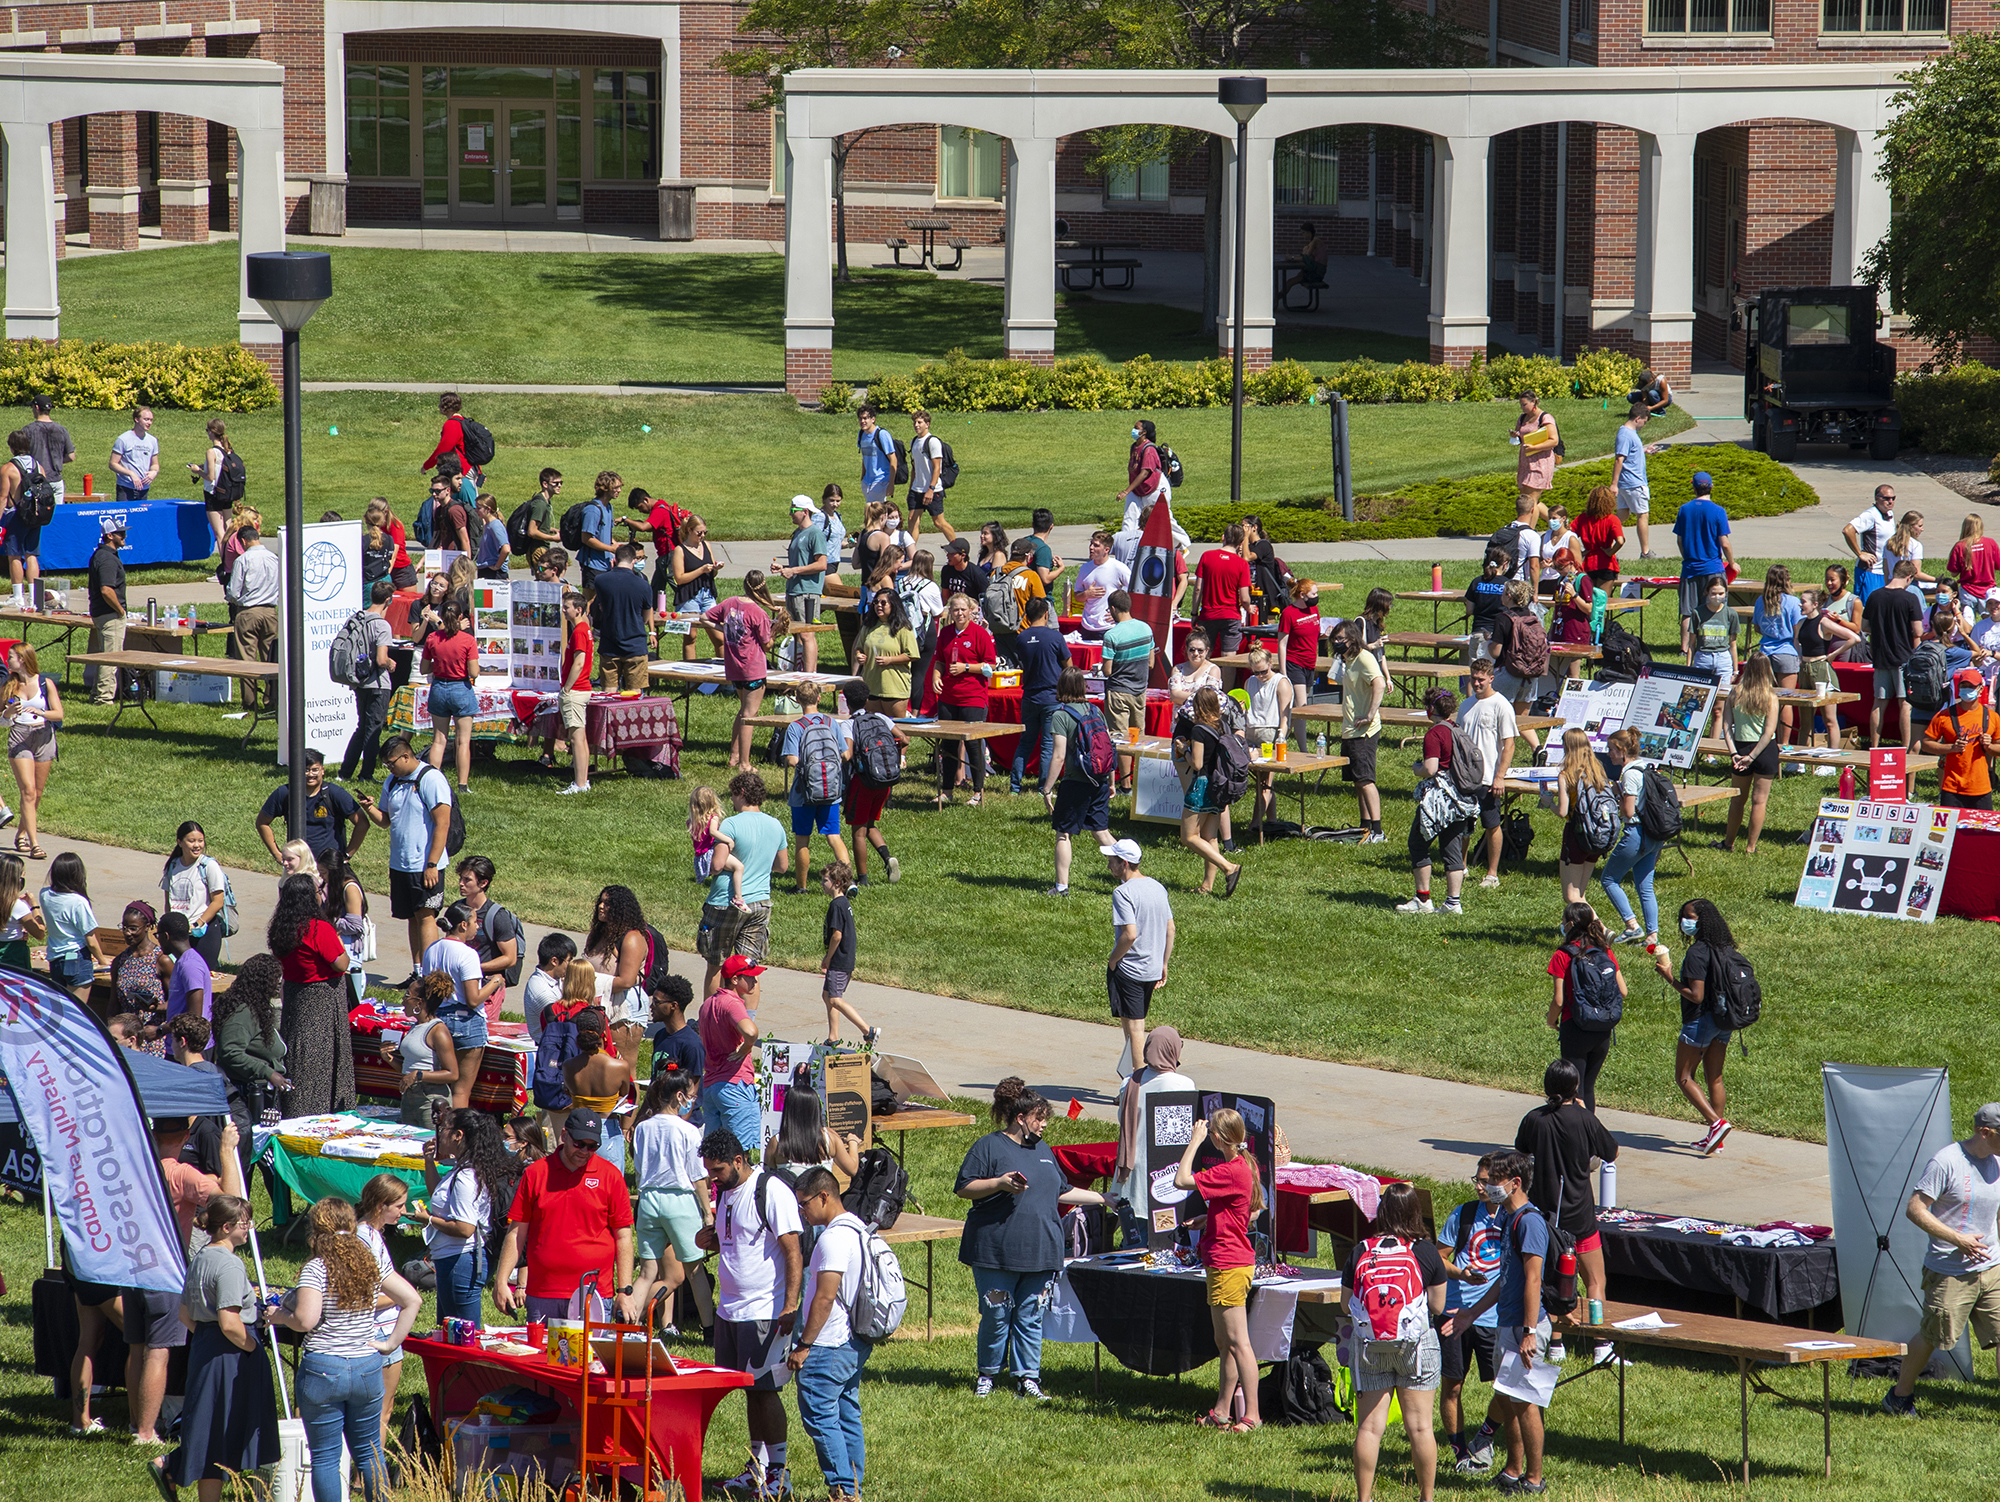 Club Fairs are August 24 on City Campus and August 25 on East Campus.